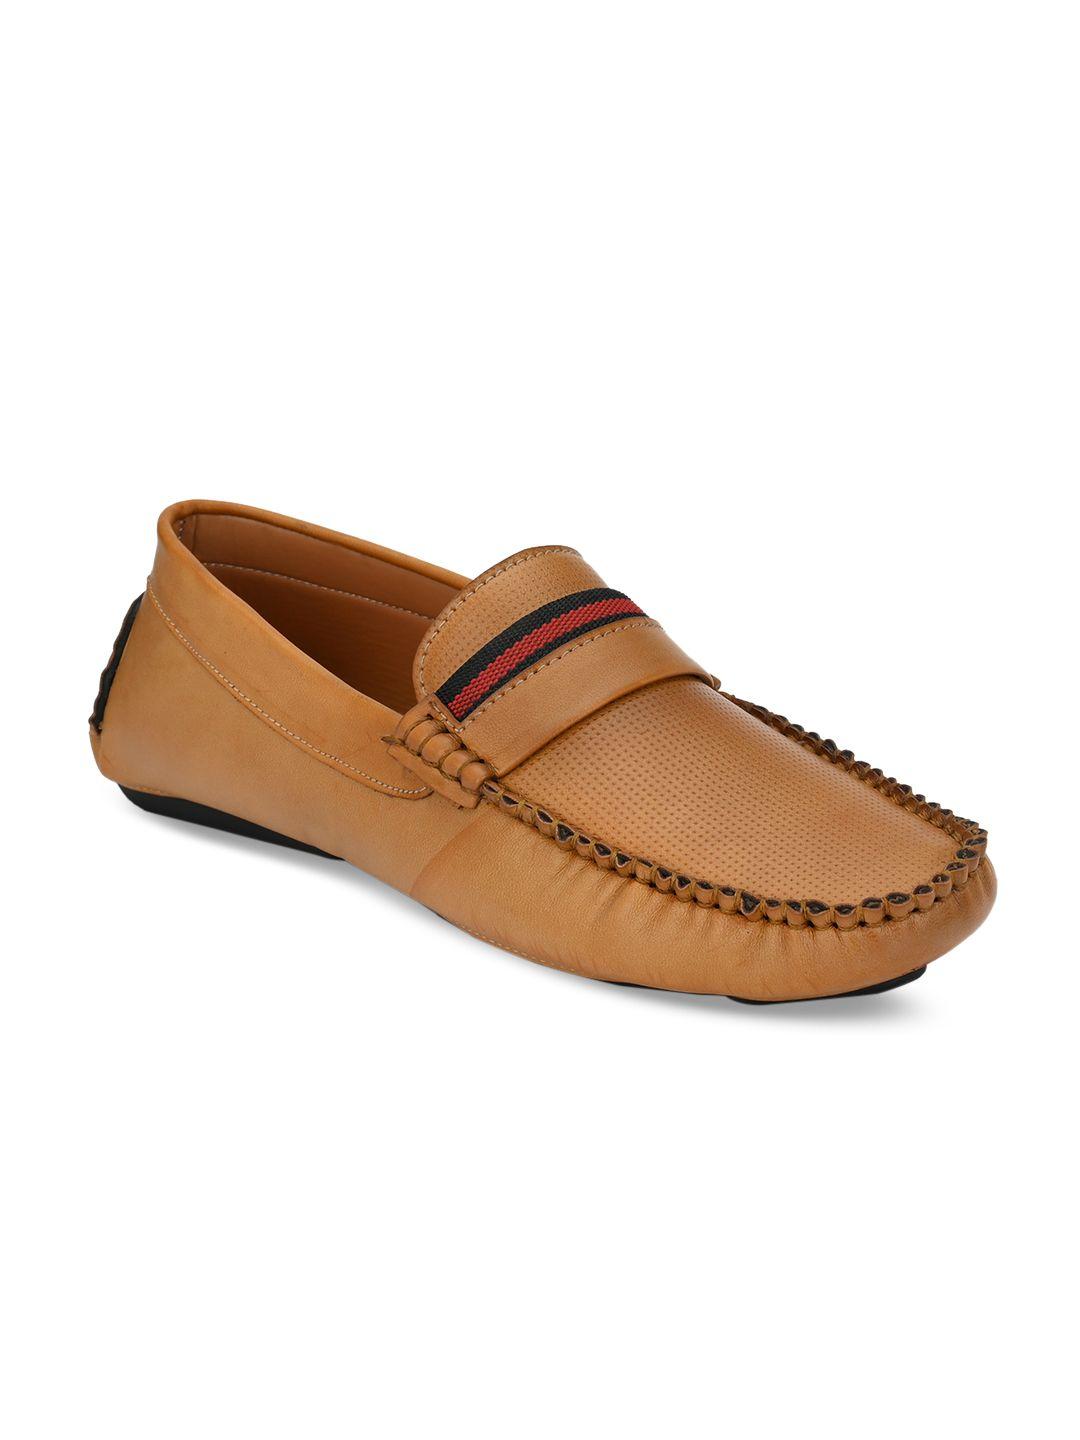 provogue men camel brown solid loafers with perforations